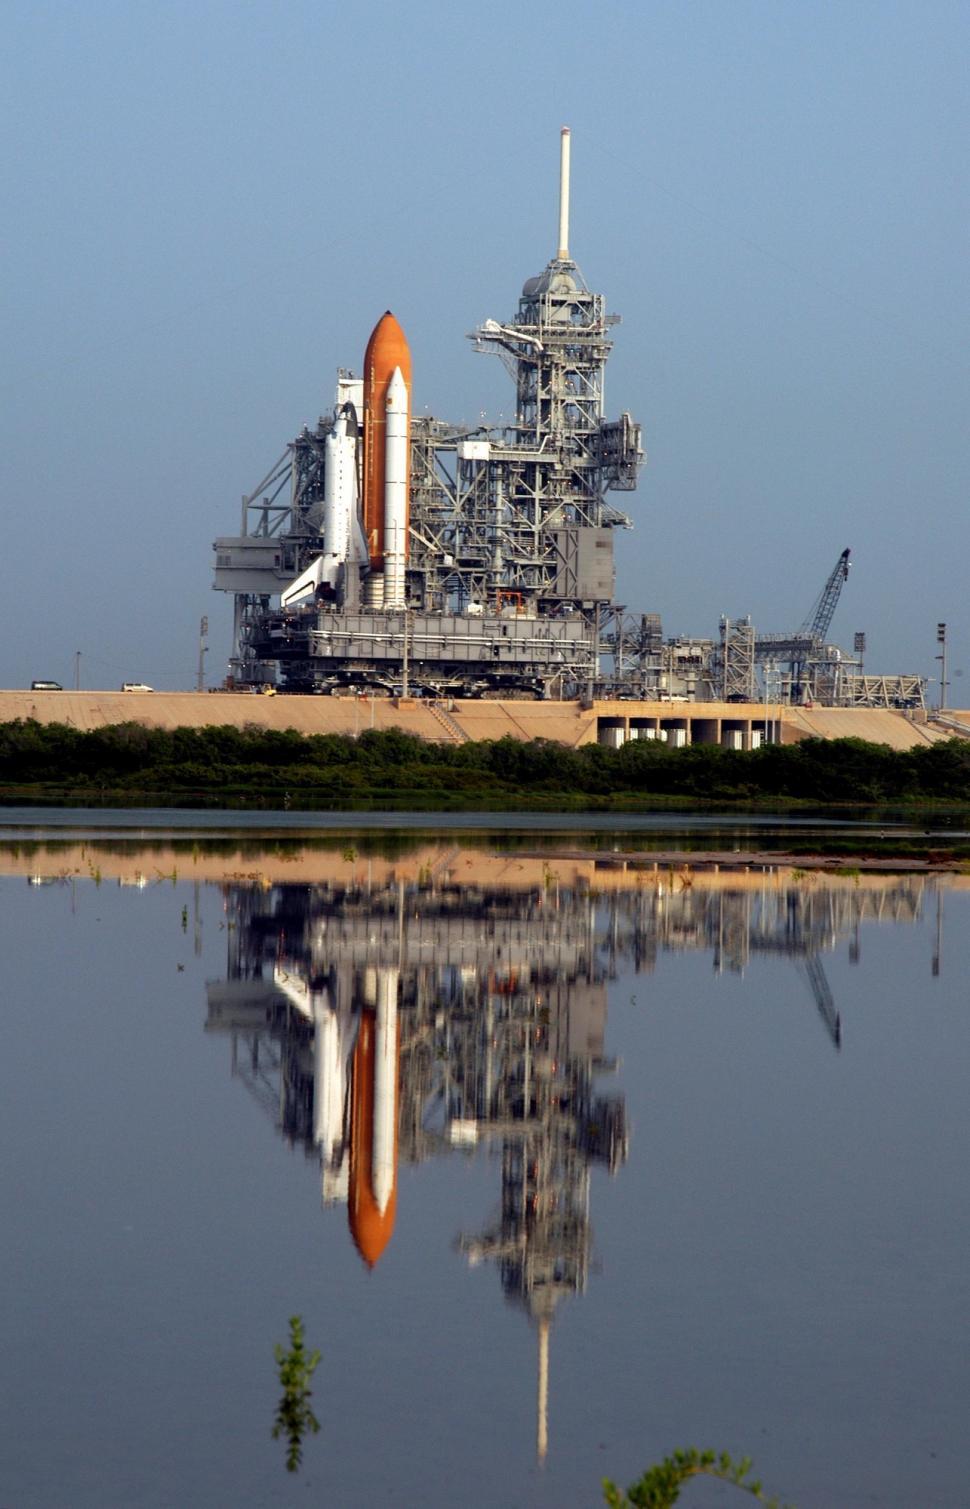 Free Image of Reflection of a Space Shuttle on a Body of Water 